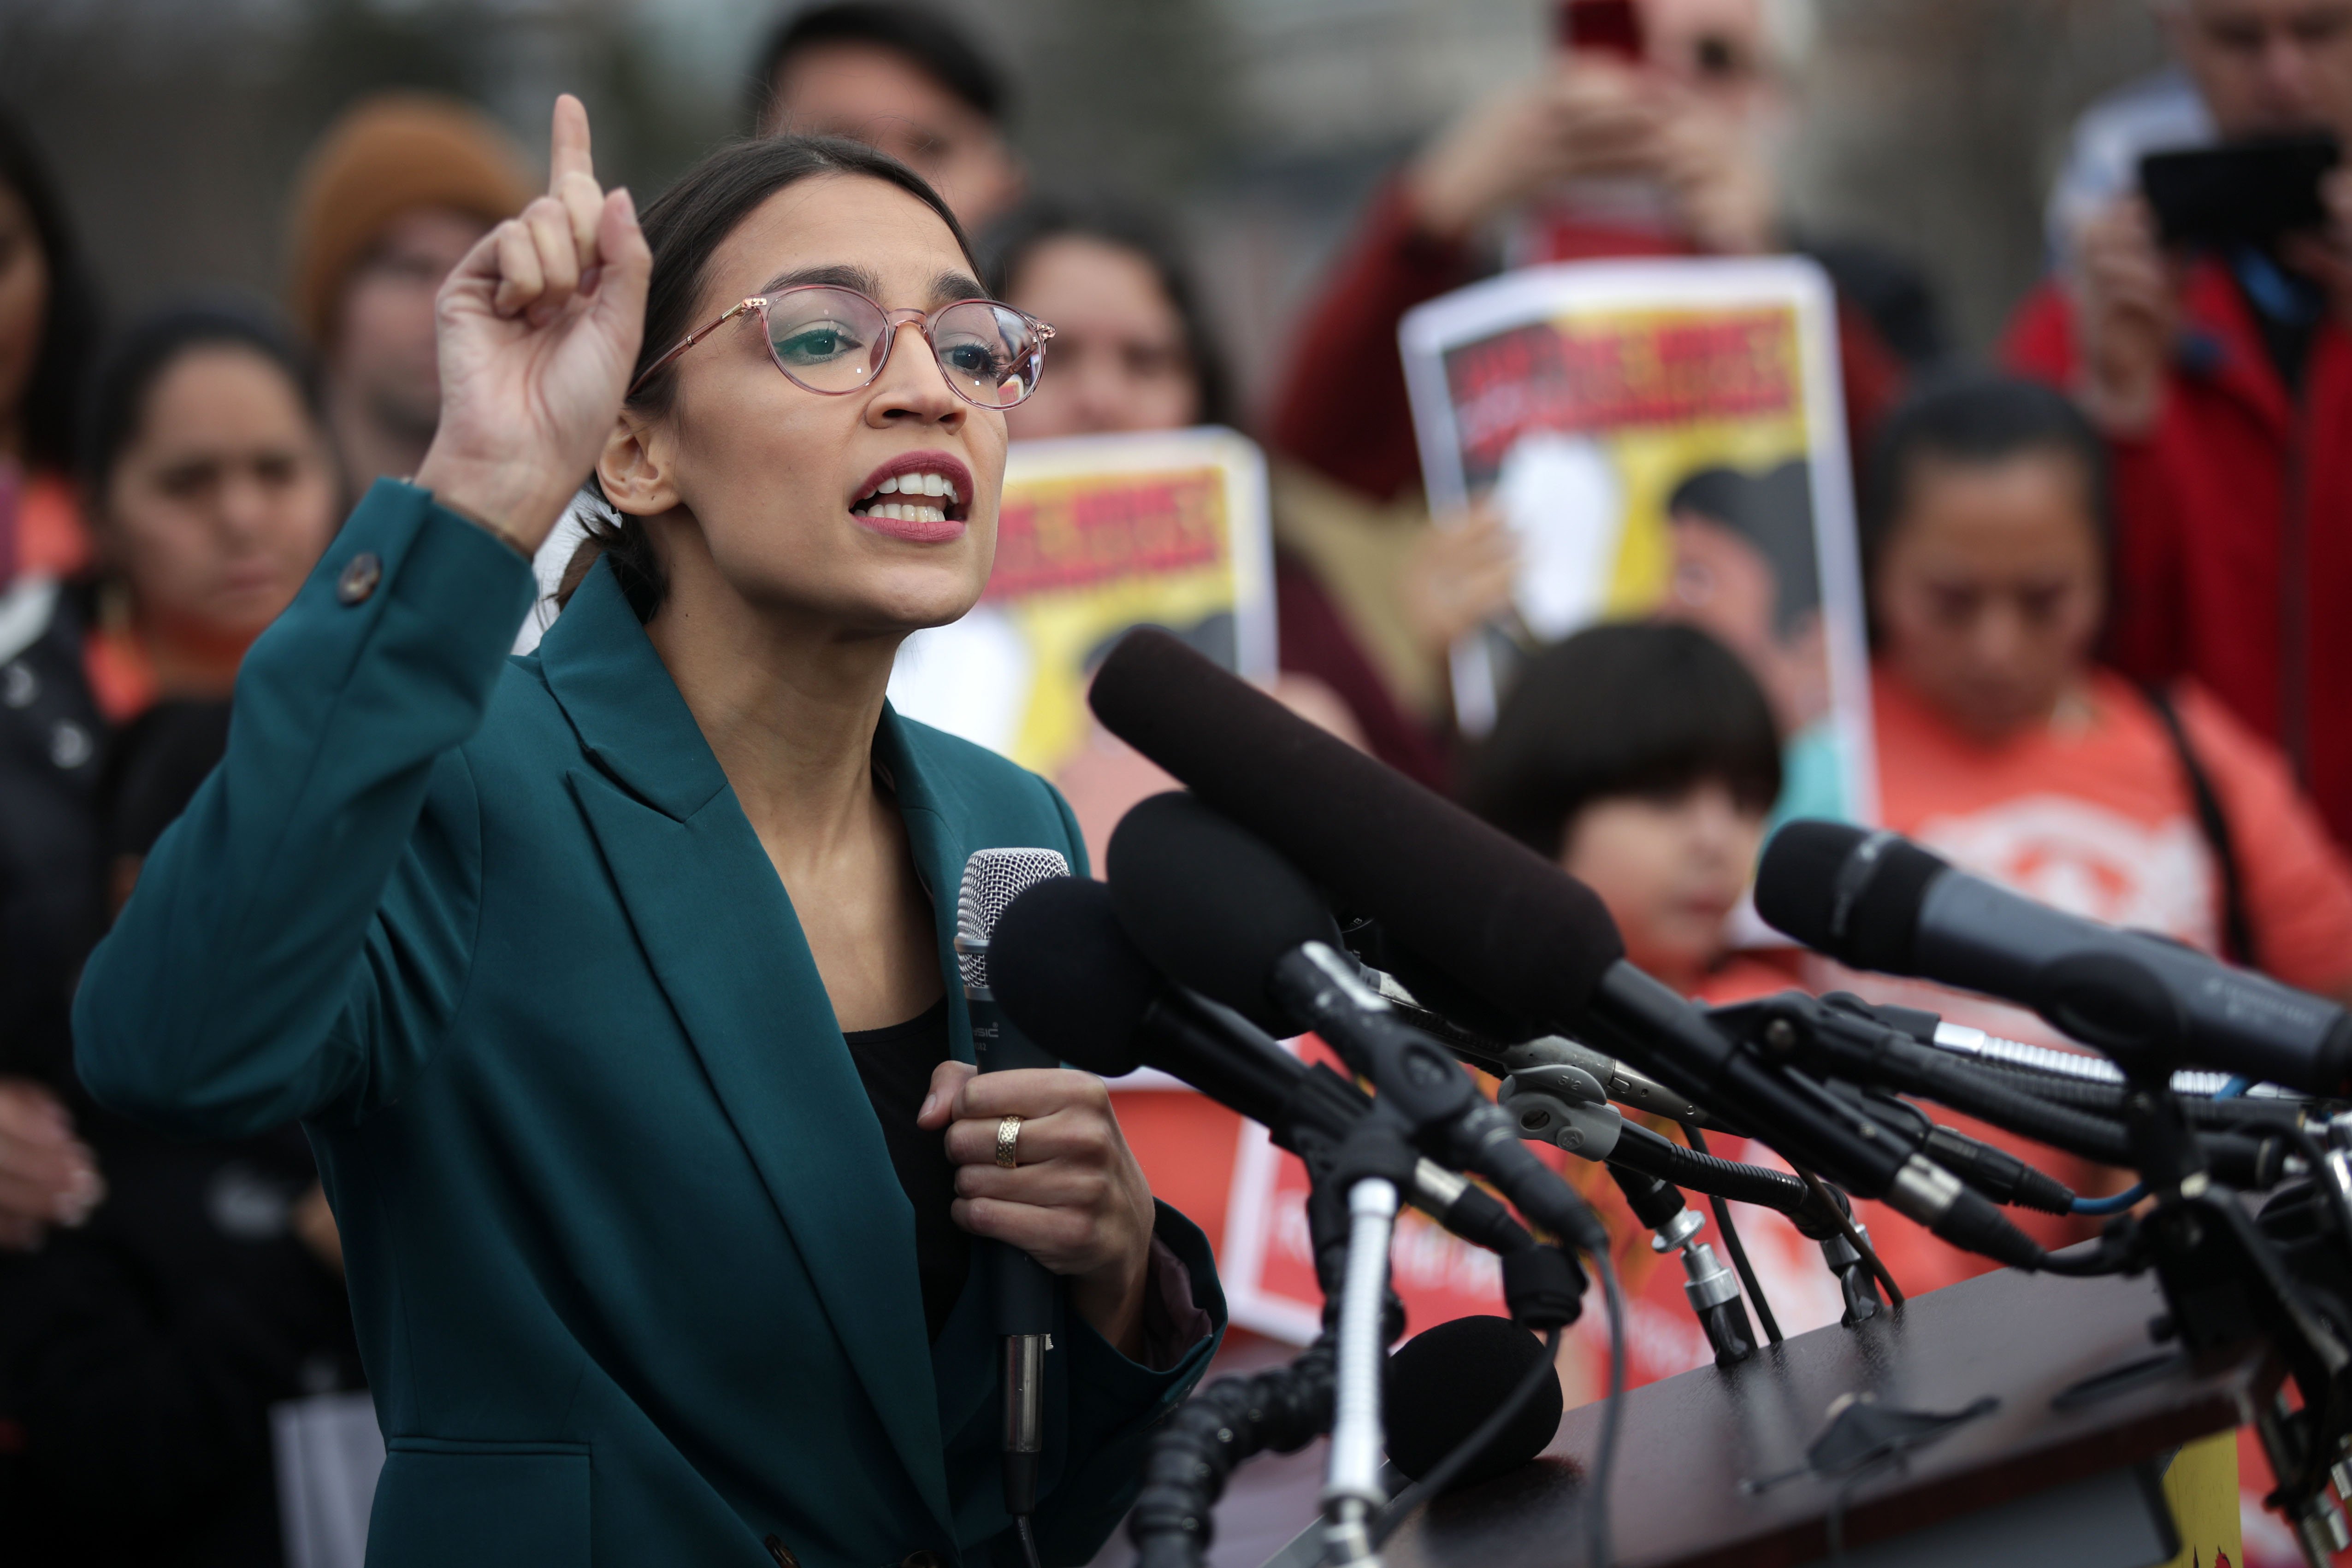 U.S. Rep. Alexandria Ocasio-Cortez speaks during a news conference at the U.S. Capitol | Photo: Getty Images